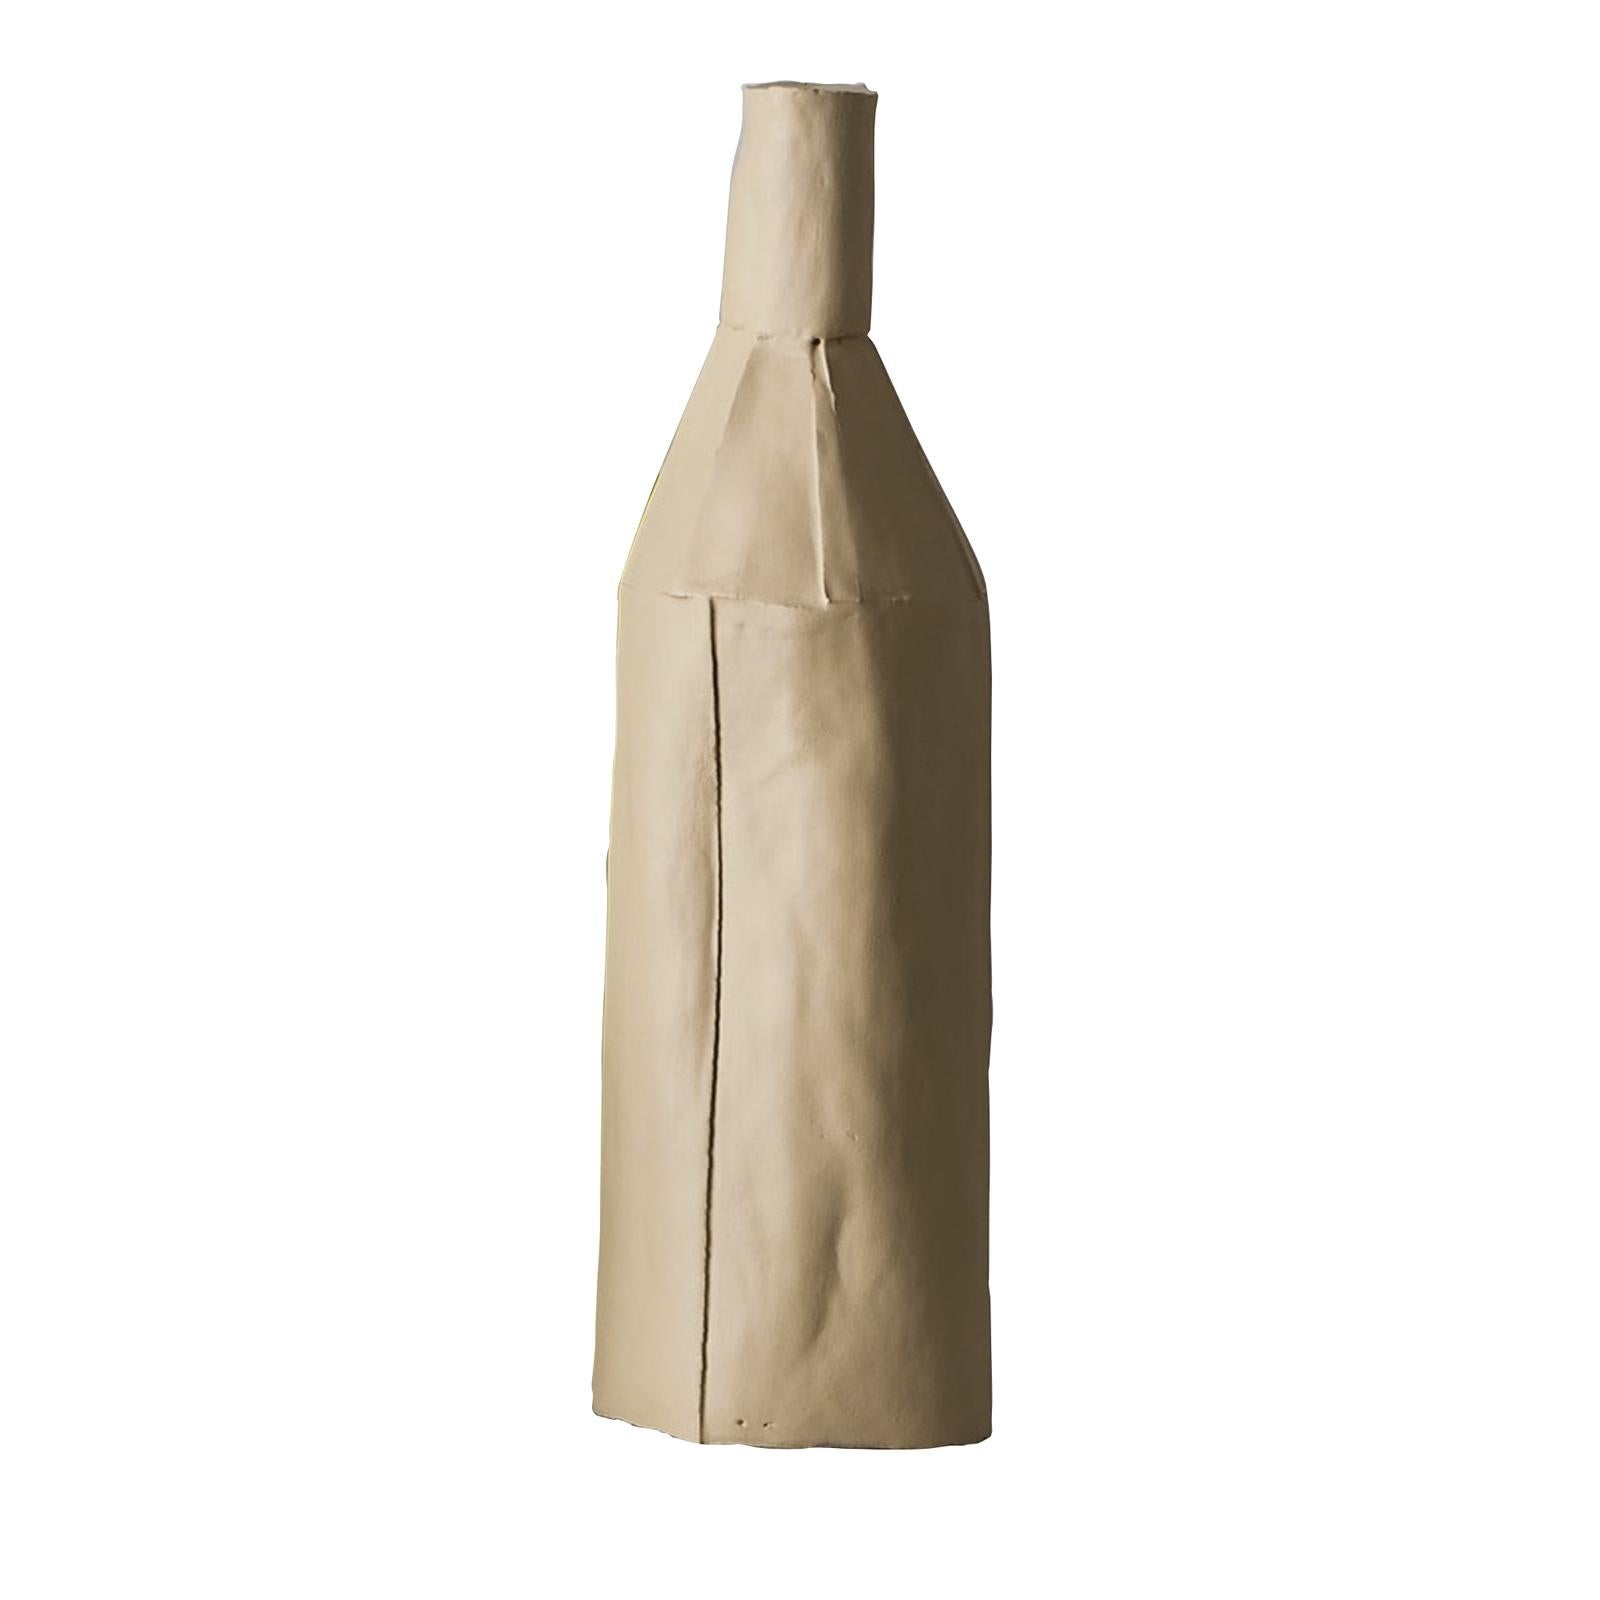 Part of the exclusive Cartocci collection, this bottle-shaped sculpture was handcrafted using paper clay, a clay-base mixture enriched with natural fibers to make it more pliable during the molding phase. The piece assumes its distinctive,